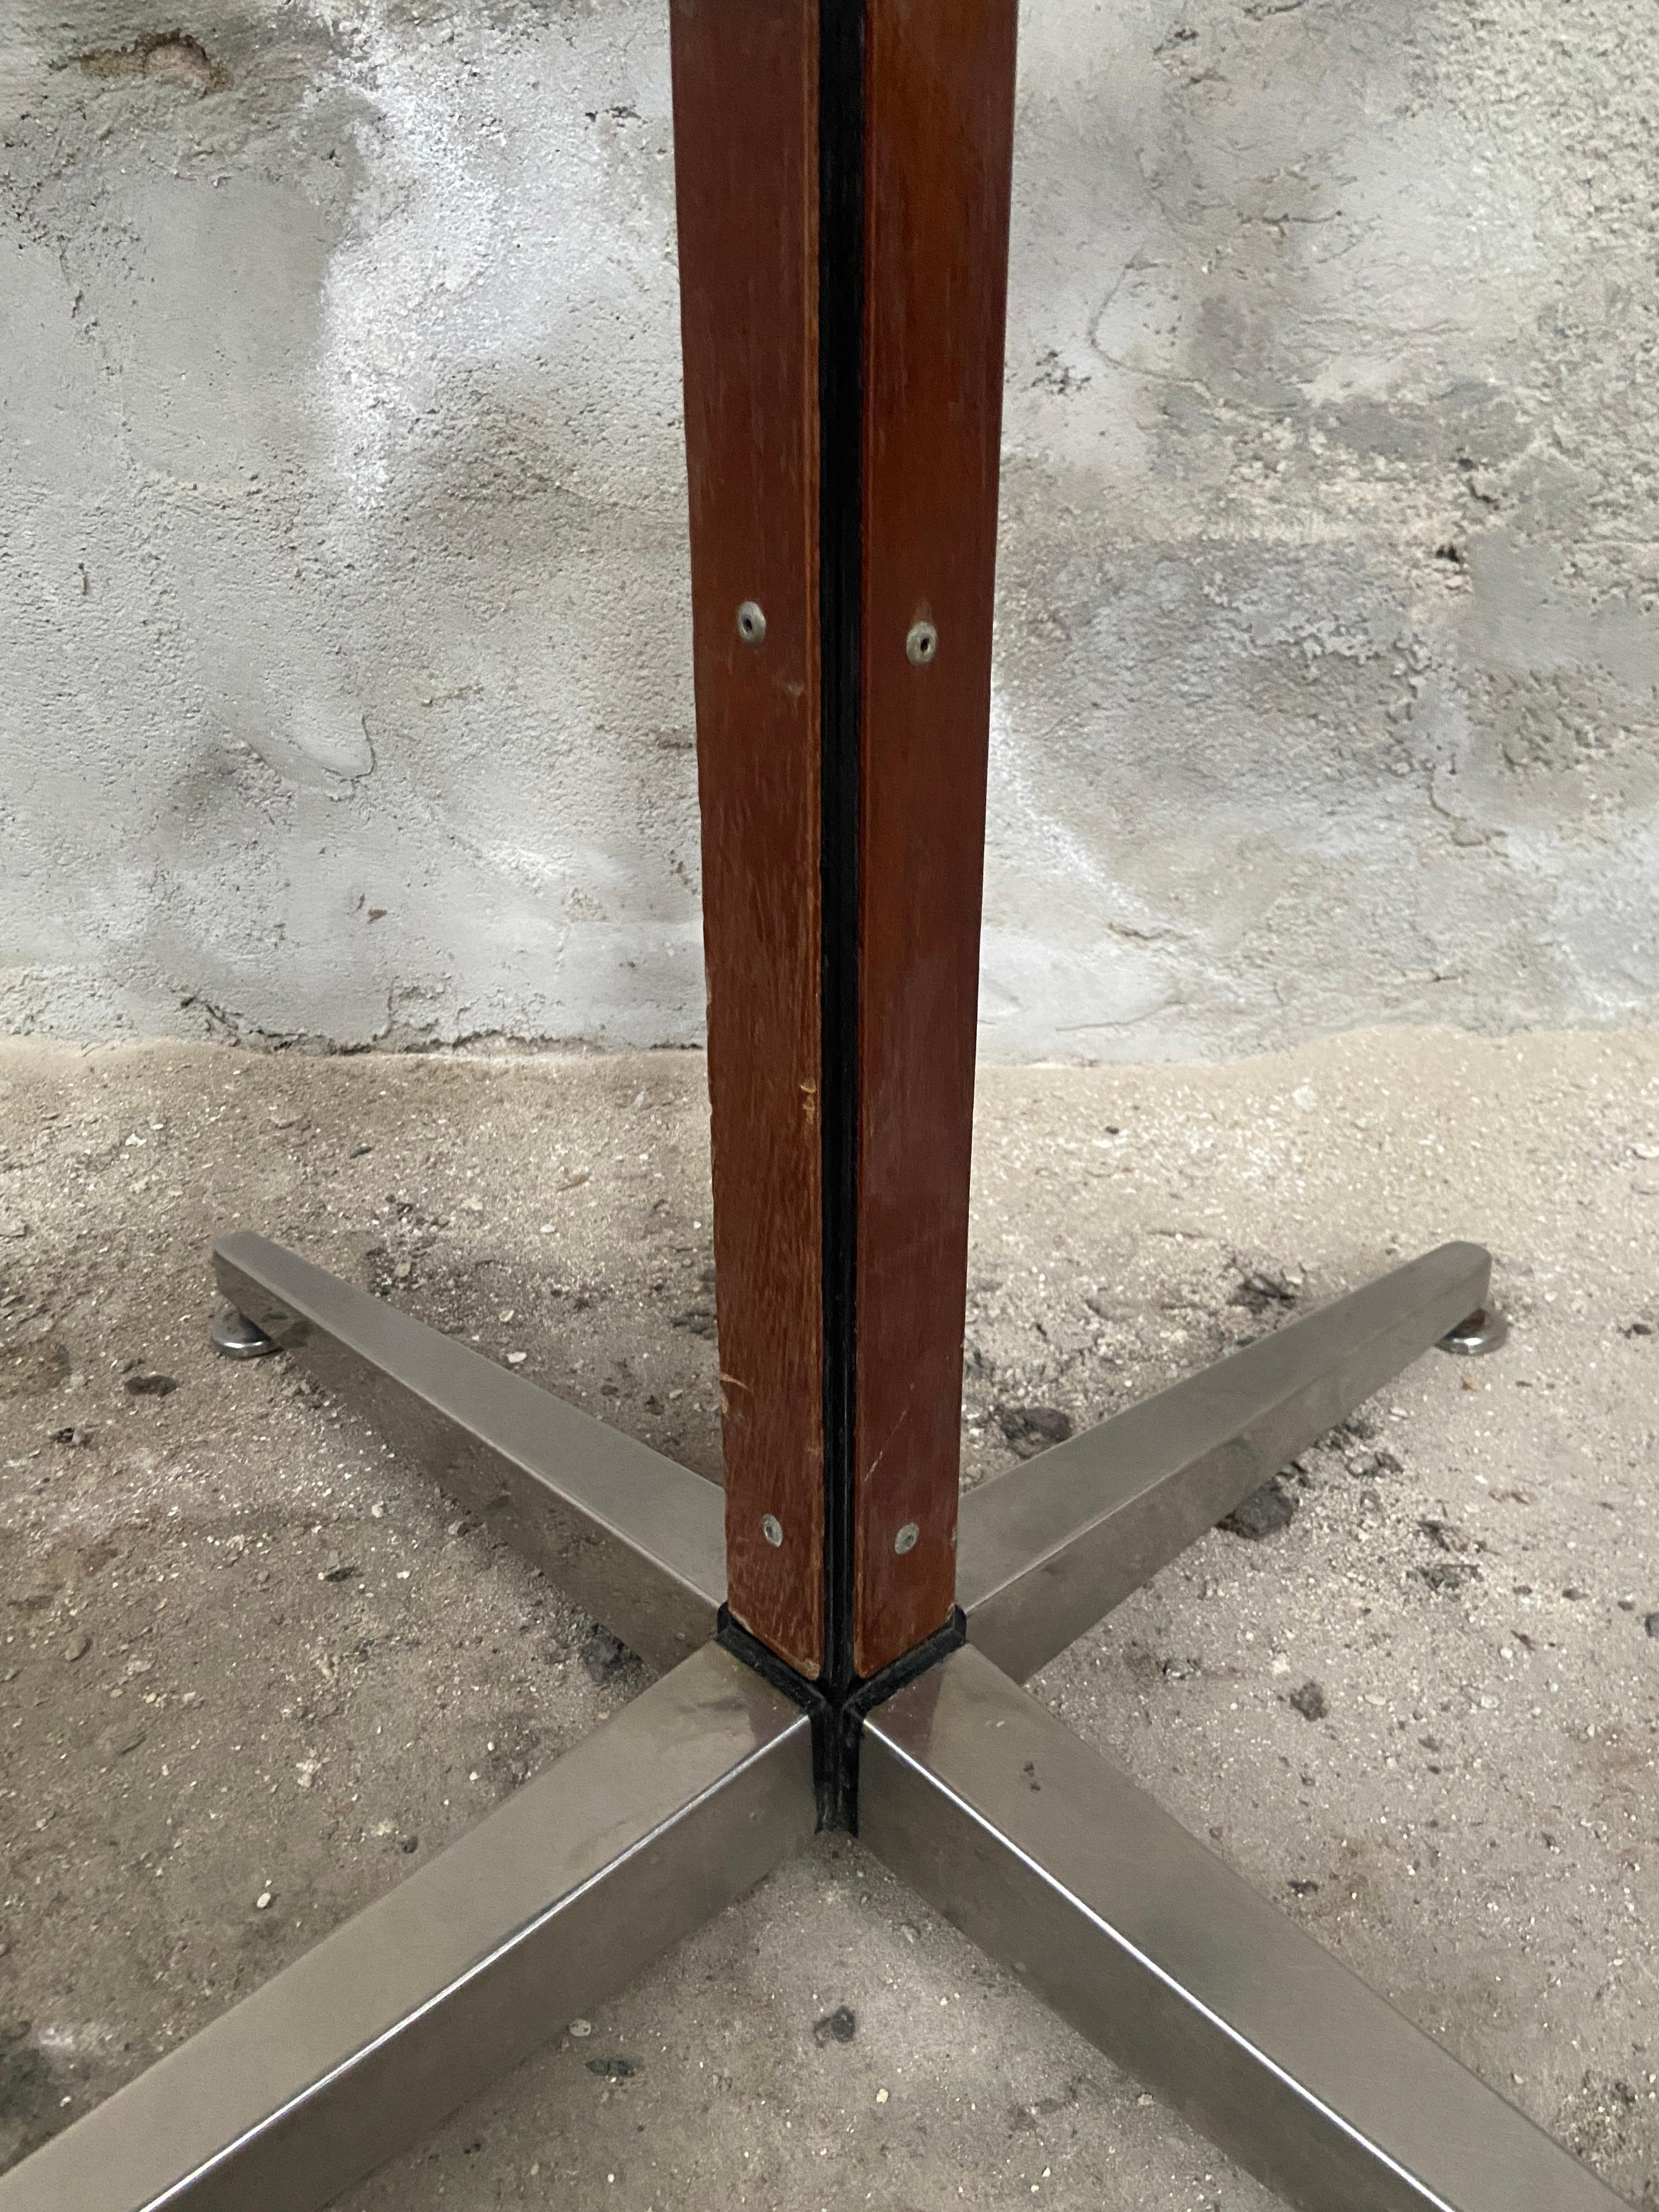 Late 20th Century Mid-Century Modern Italian Iron Table Base with Aluminum Legs 'Small Size' For Sale